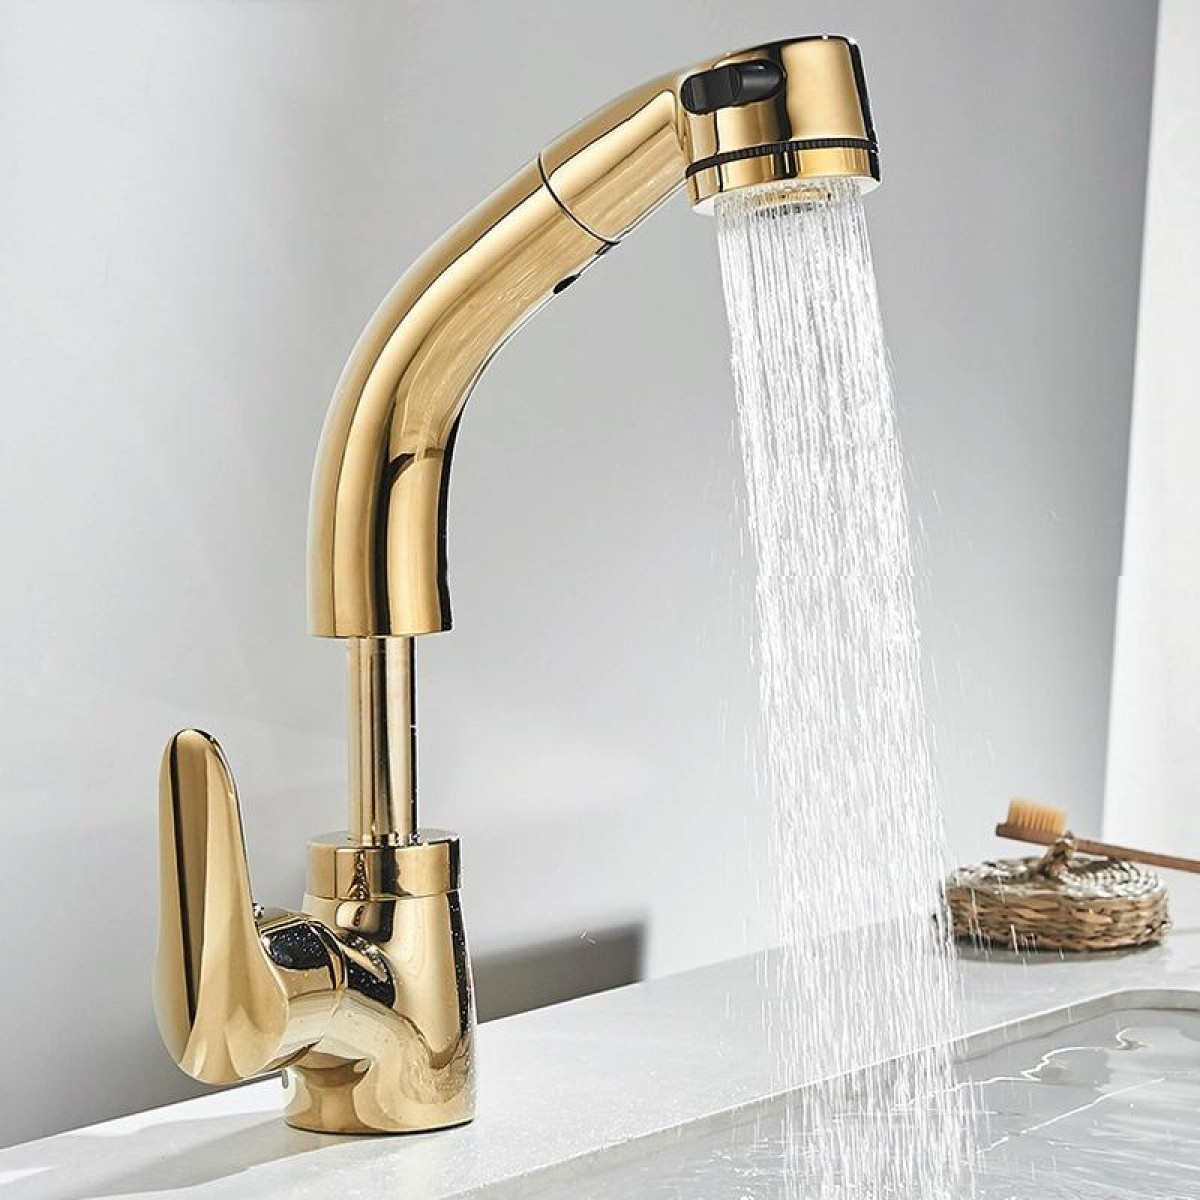 All-Copper Body Pull-Out Hot & Cold Water Faucet Liftable Washbasin Universal Faucet(Golden)